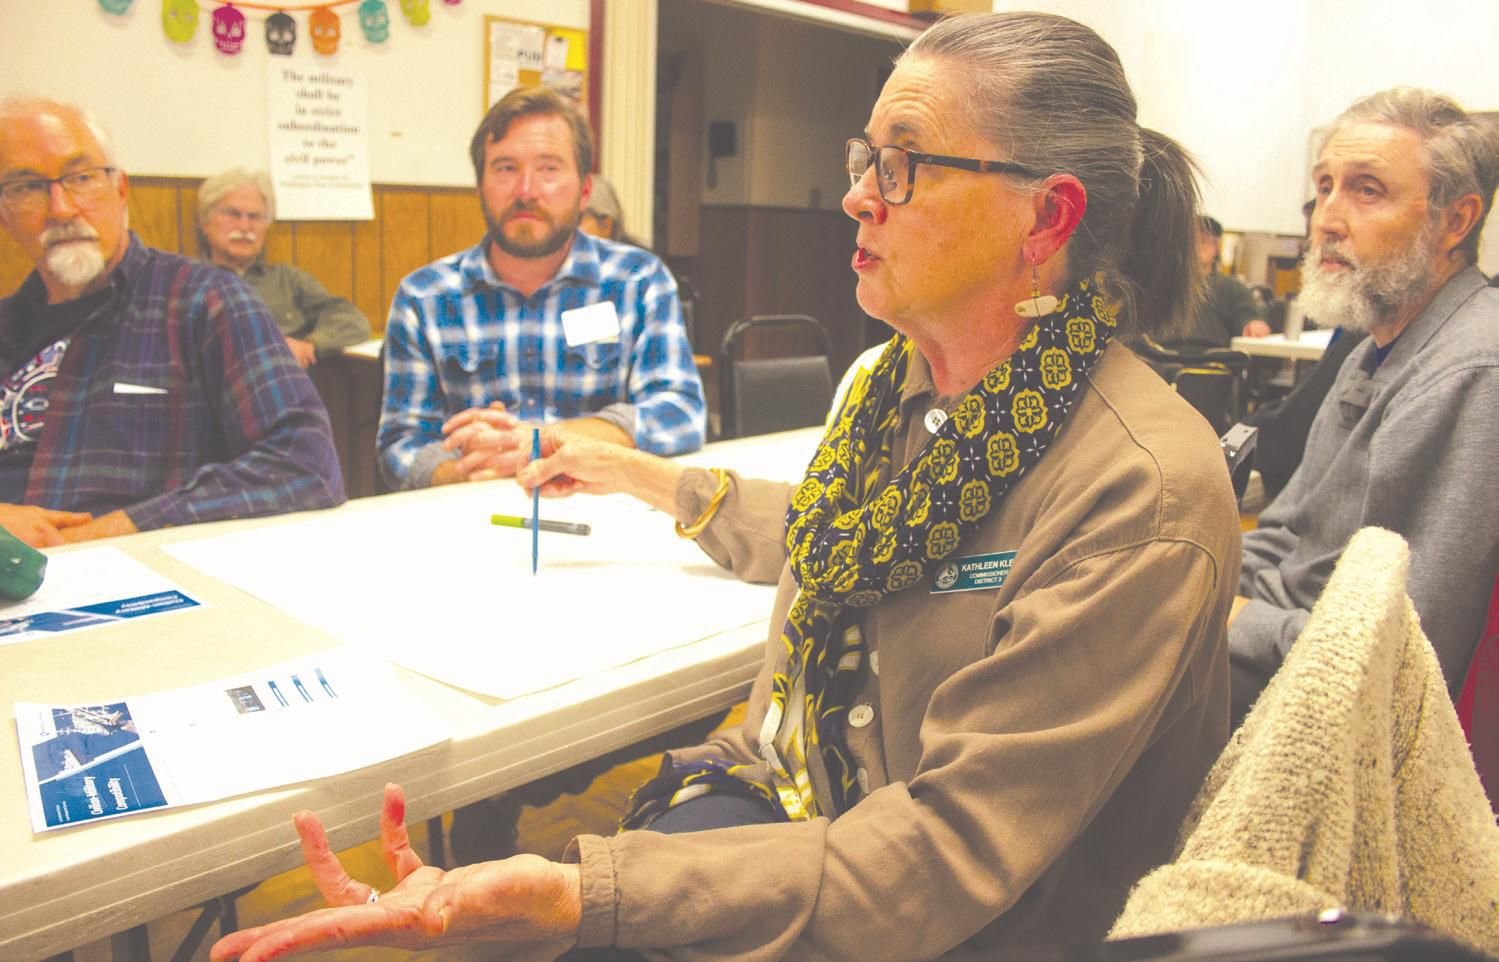 Jefferson County Commissioner Kathleen Kler expresses her concerns to representatives of the state Department of Commerce about the military's land use development rights over the county, during an Oct. 30 meeting to solicit public input at the Tri-Area Community Center.